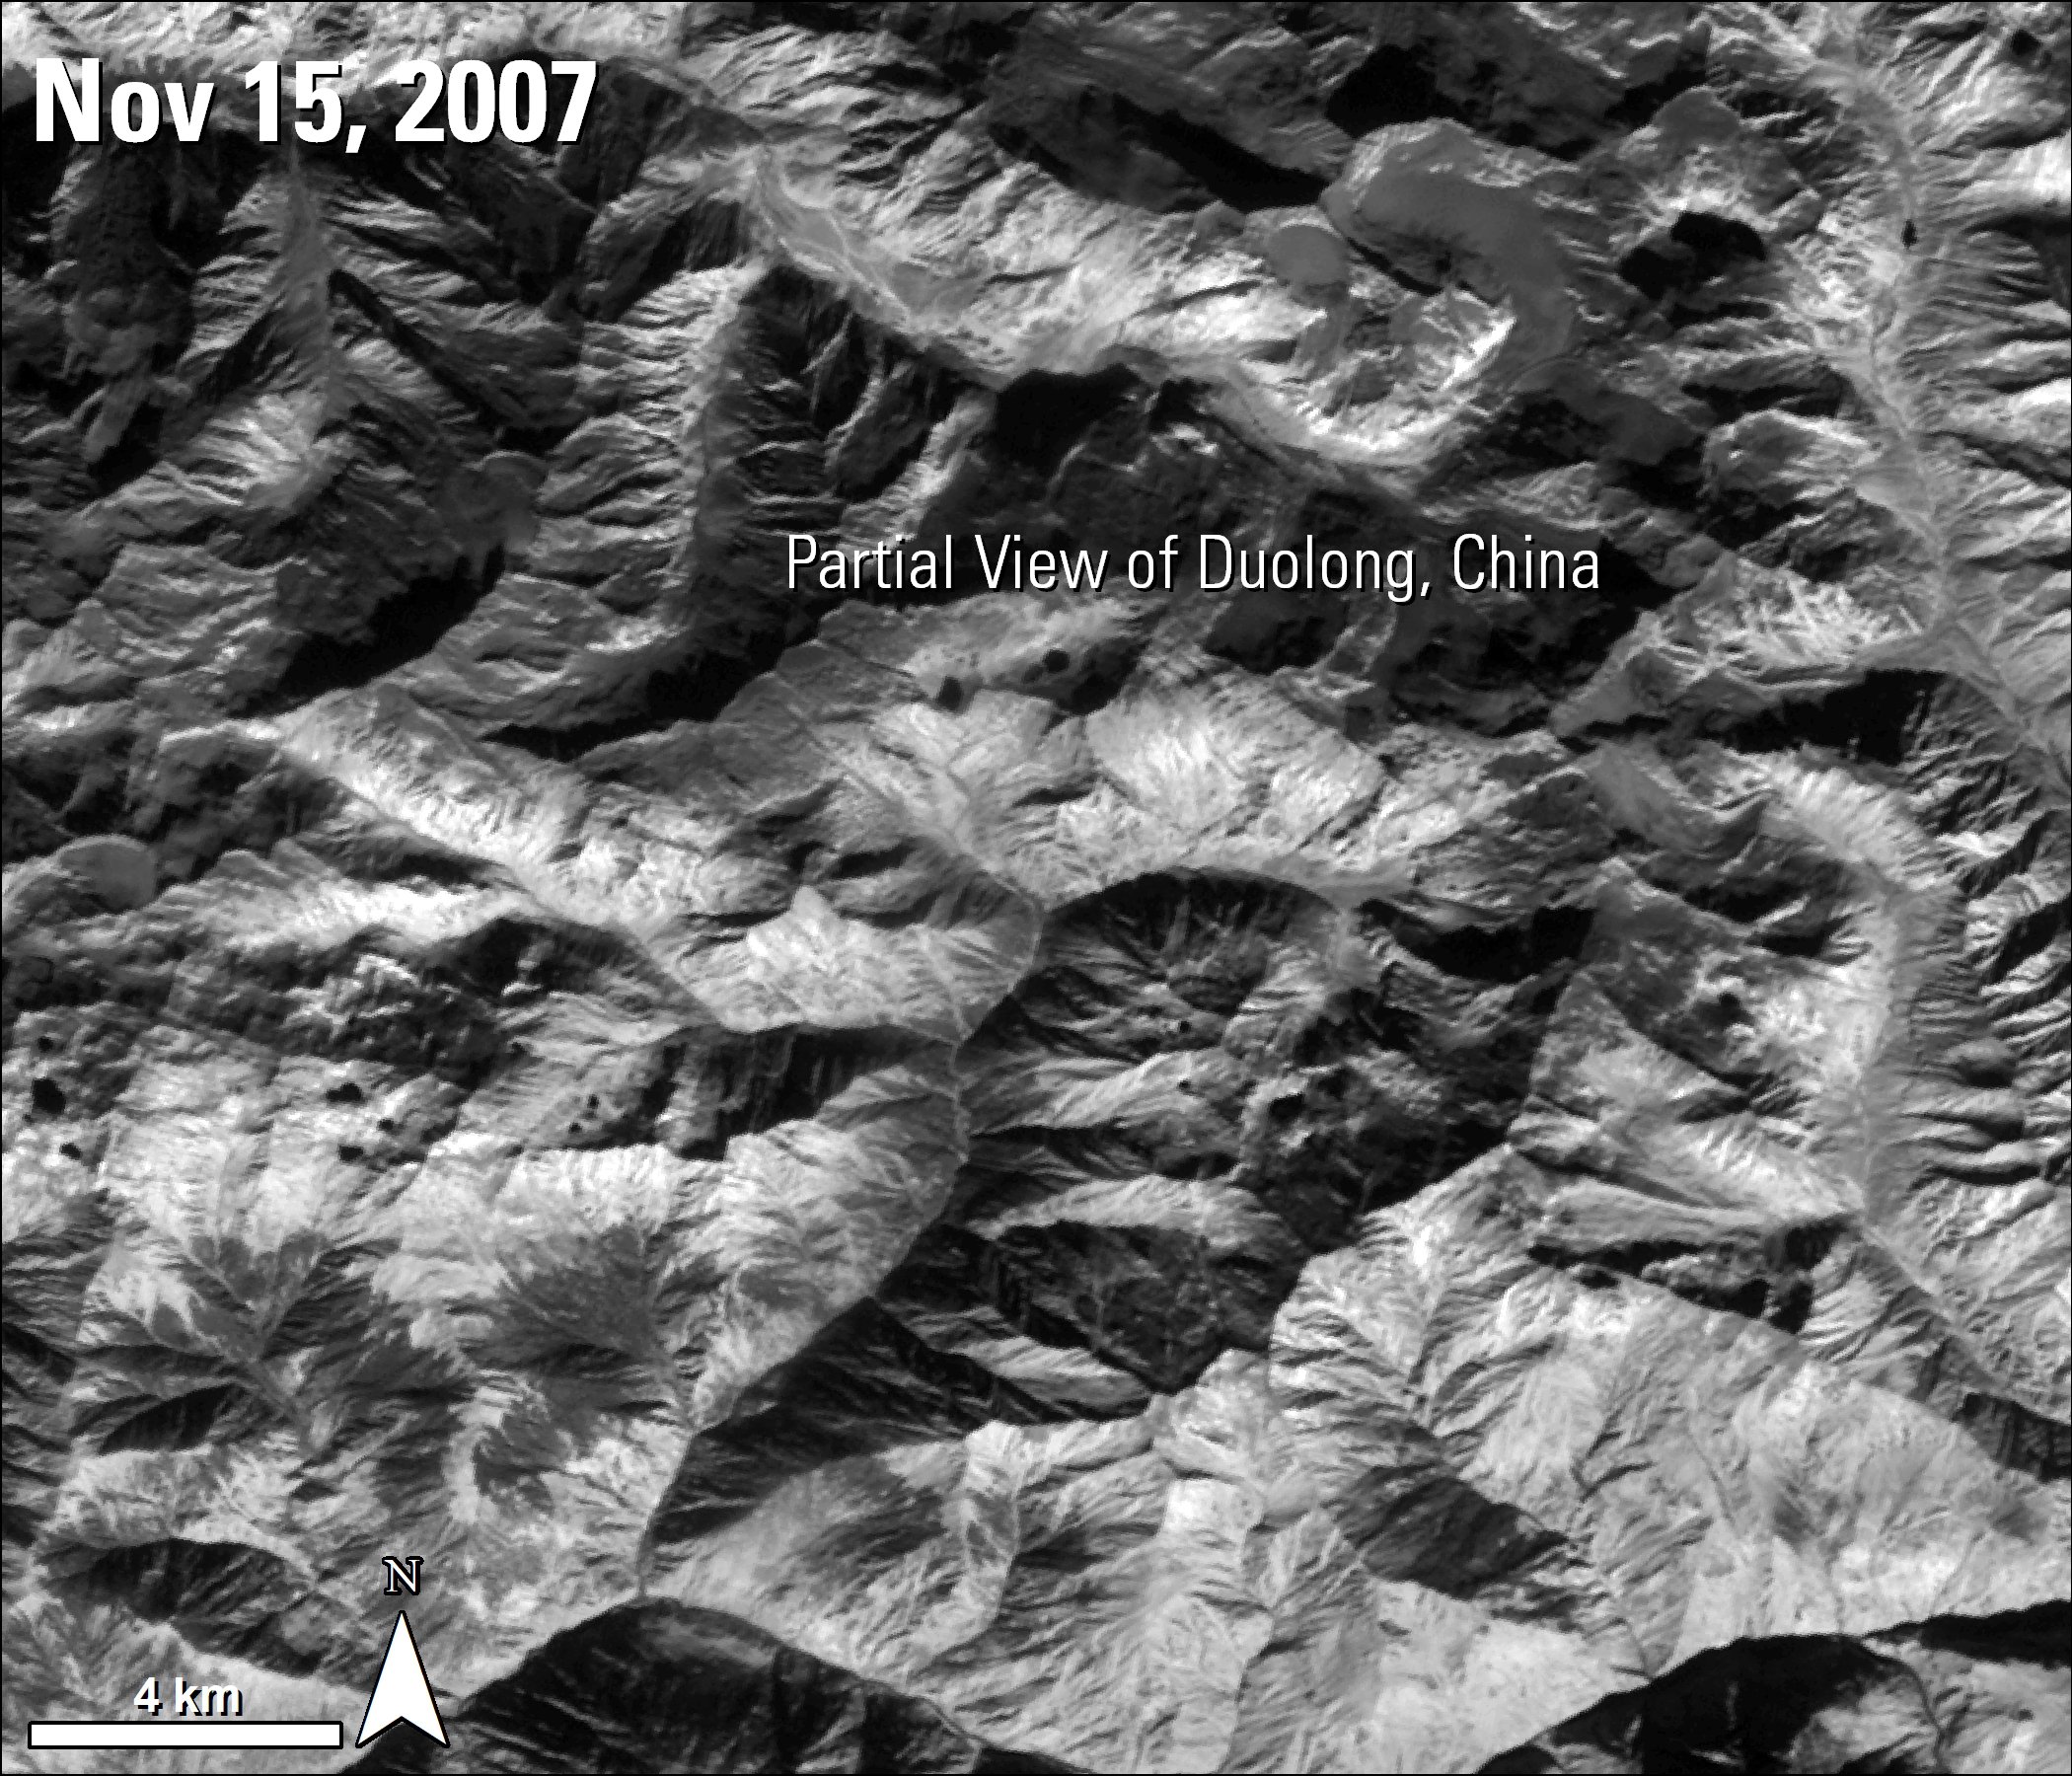 Mineral deposits over China.